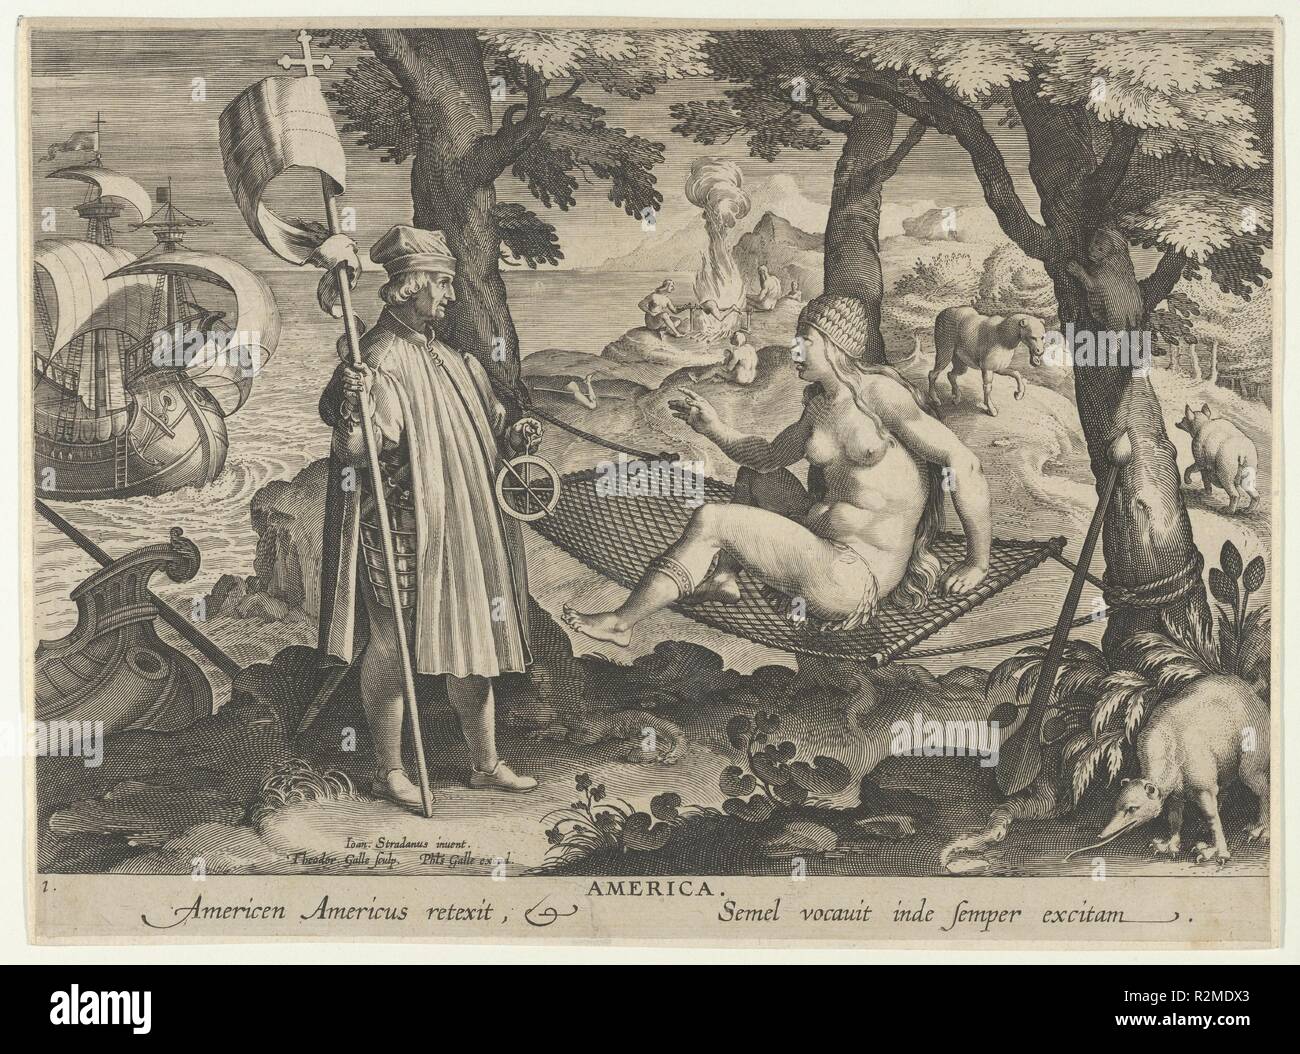 New Inventions of Modern Times [Nova Reperta], The Discovery of America, plate 1. Artist: After Jan van der Straet, called Stradanus (Netherlandish, Bruges 1523-1605 Florence); Theodoor Galle (Netherlandish, Antwerp 1571-1633 Antwerp). Dimensions: sheet: 10 5/8 x 7 7/8 in. (27 x 20 cm). Publisher: Philips Galle (Netherlandish, Haarlem 1537-1612 Antwerp). Date: ca. 1600.  First plate from a print series entitled Nova Reperta (New Inventions of Modern Times) consisting of a title page and 19 plates, engraved by Jan Collaert I, after Jan van der Straet, called Stradanus, and published by Philips  Stock Photo